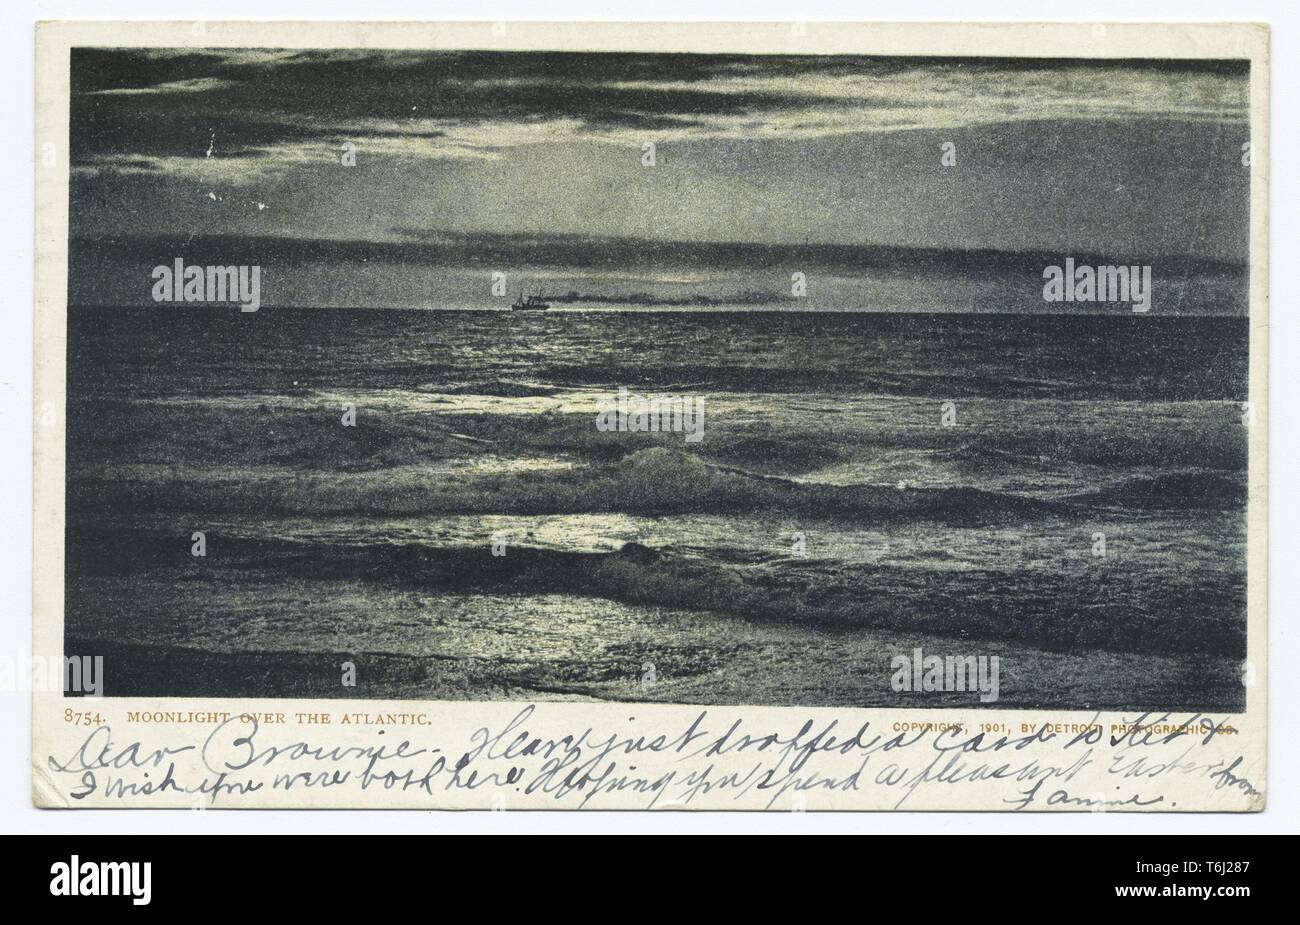 Detroit Publishing Company vintage postcard of Moonlight over the Atlantic Ocean with tall ship visible, 1900. From the New York Public Library. () Stock Photo